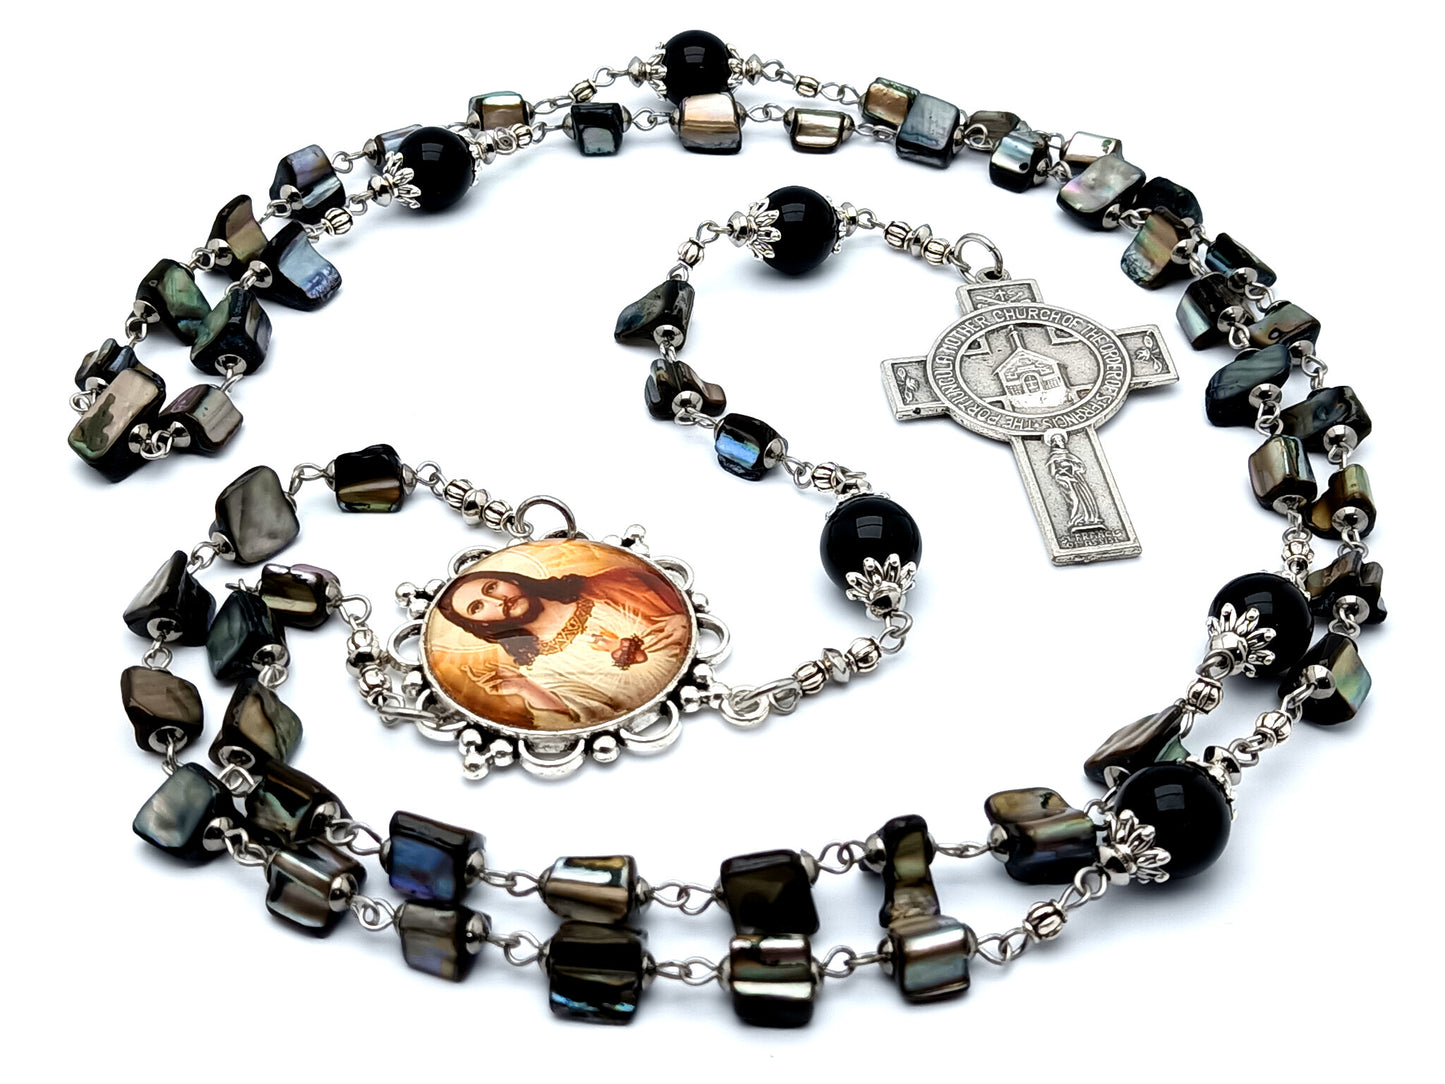 Sacred Heart of Jesus unique rosary beads with shell and onyx gemstone beads and Saint Francis Portuncula Mother church cross with blessing prayer.